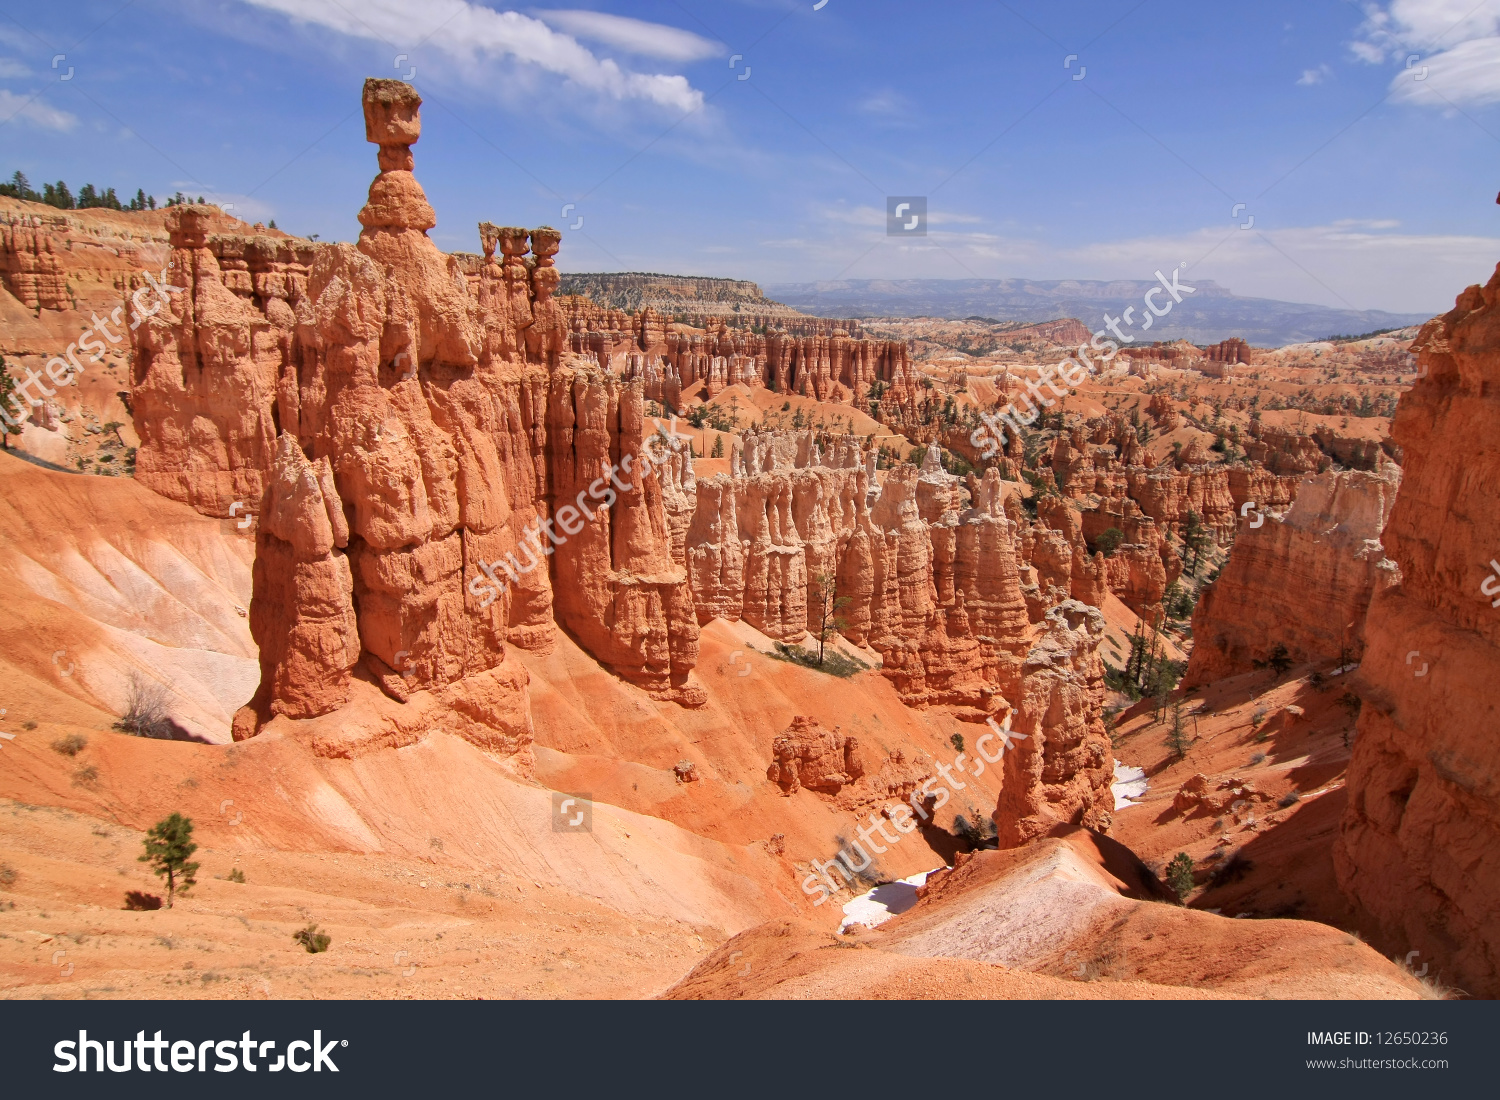 Bryce Canyon National Park clipart #1, Download drawings